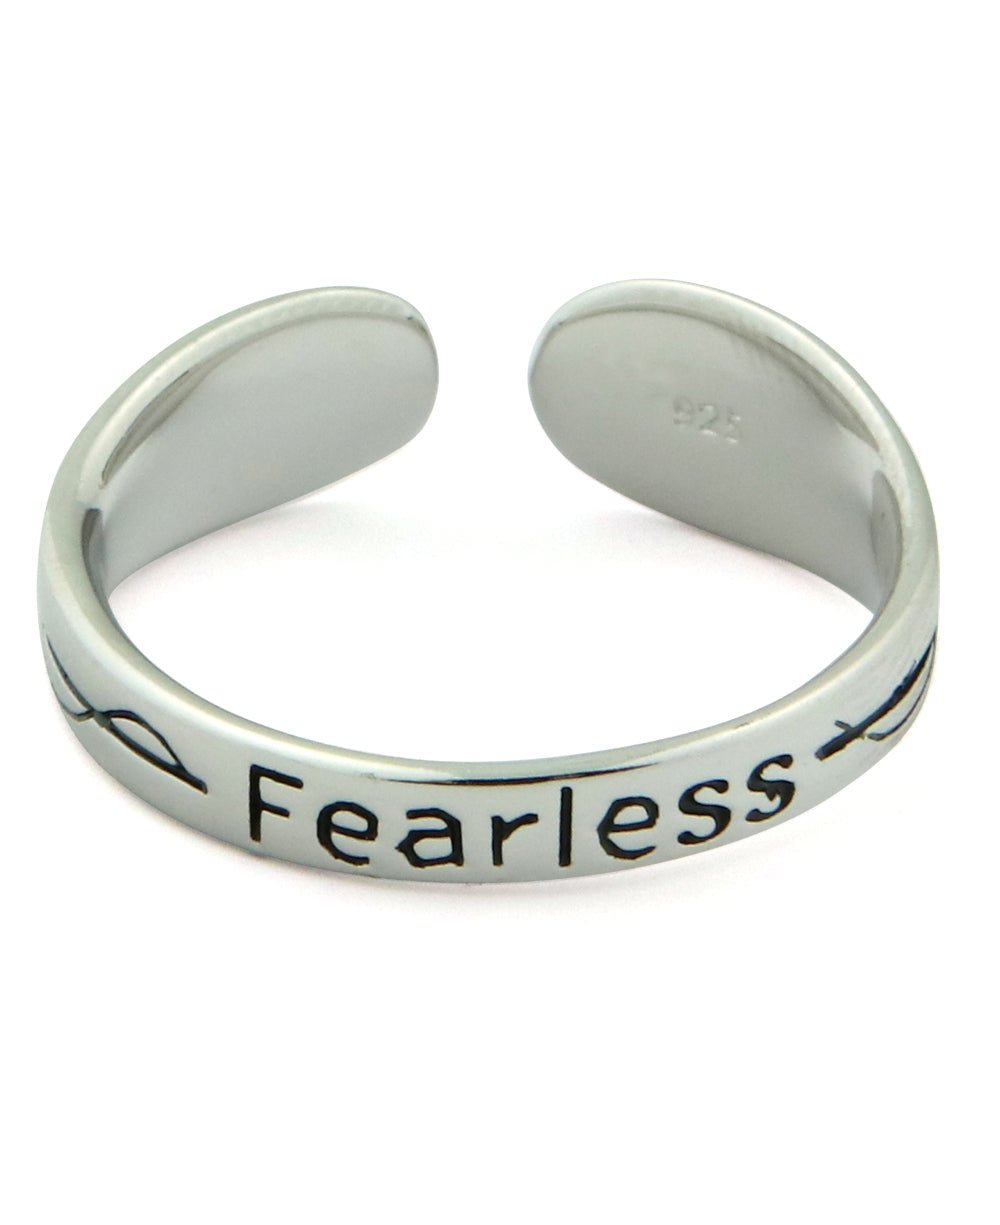 Fearless Inspirational Mantra Ring - Rings